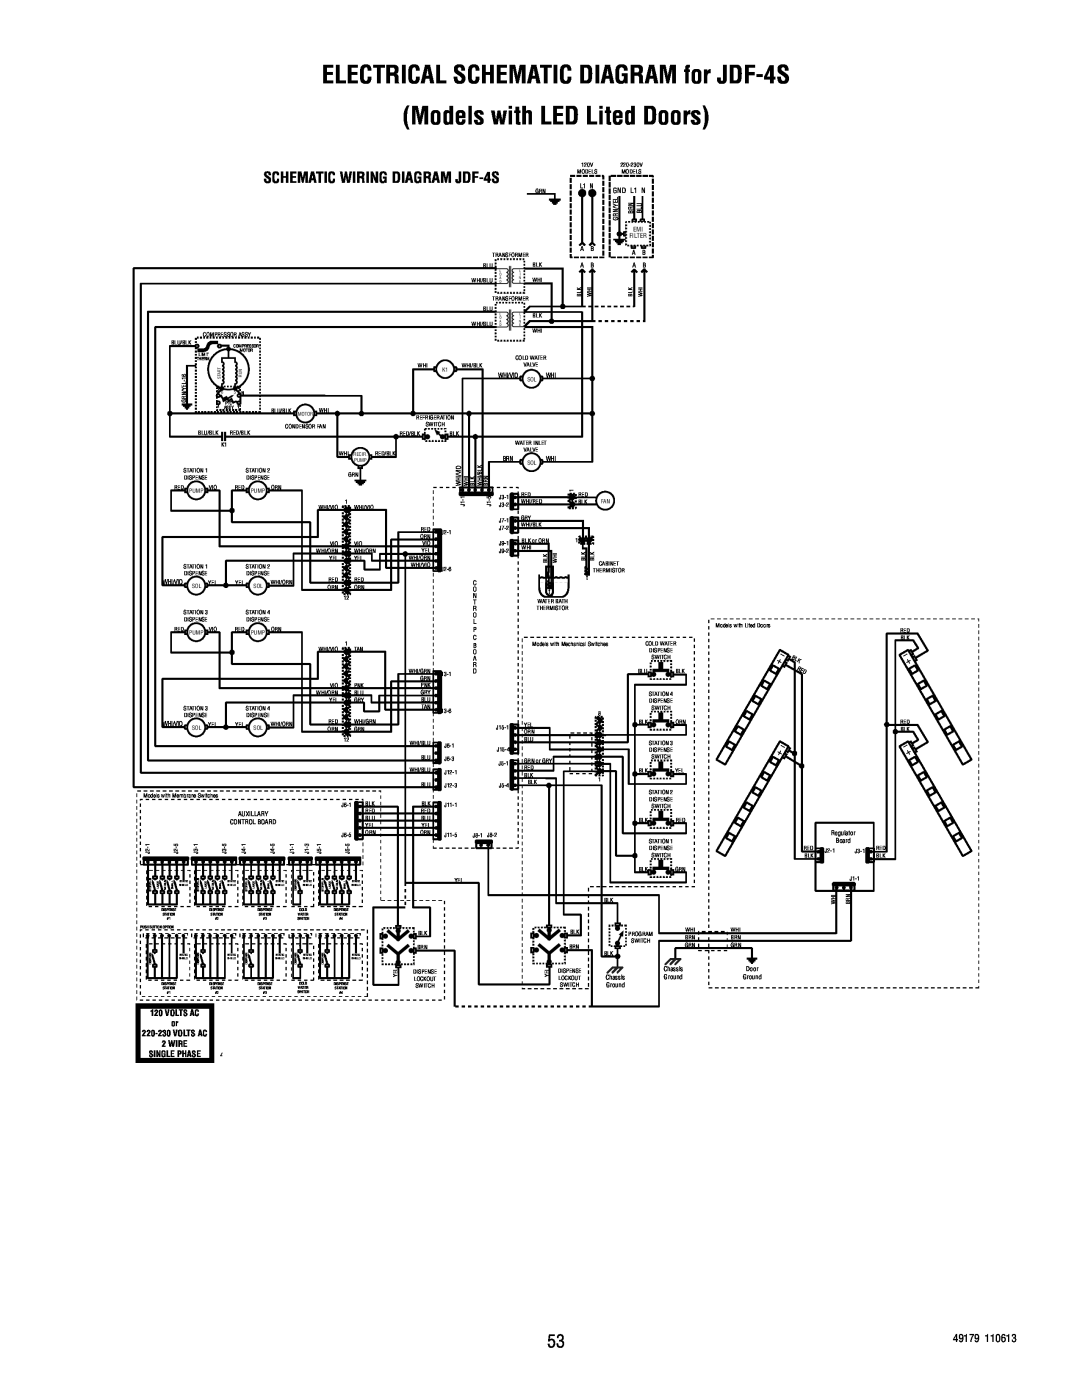 Bunn JDF-4D ELECTRICAL SCHEMATIC DIAGRAM for JDF-4S Models with LED Lited Doors, SCHEMATIC WIRING DIAGRAM JDF-4S, 49179 